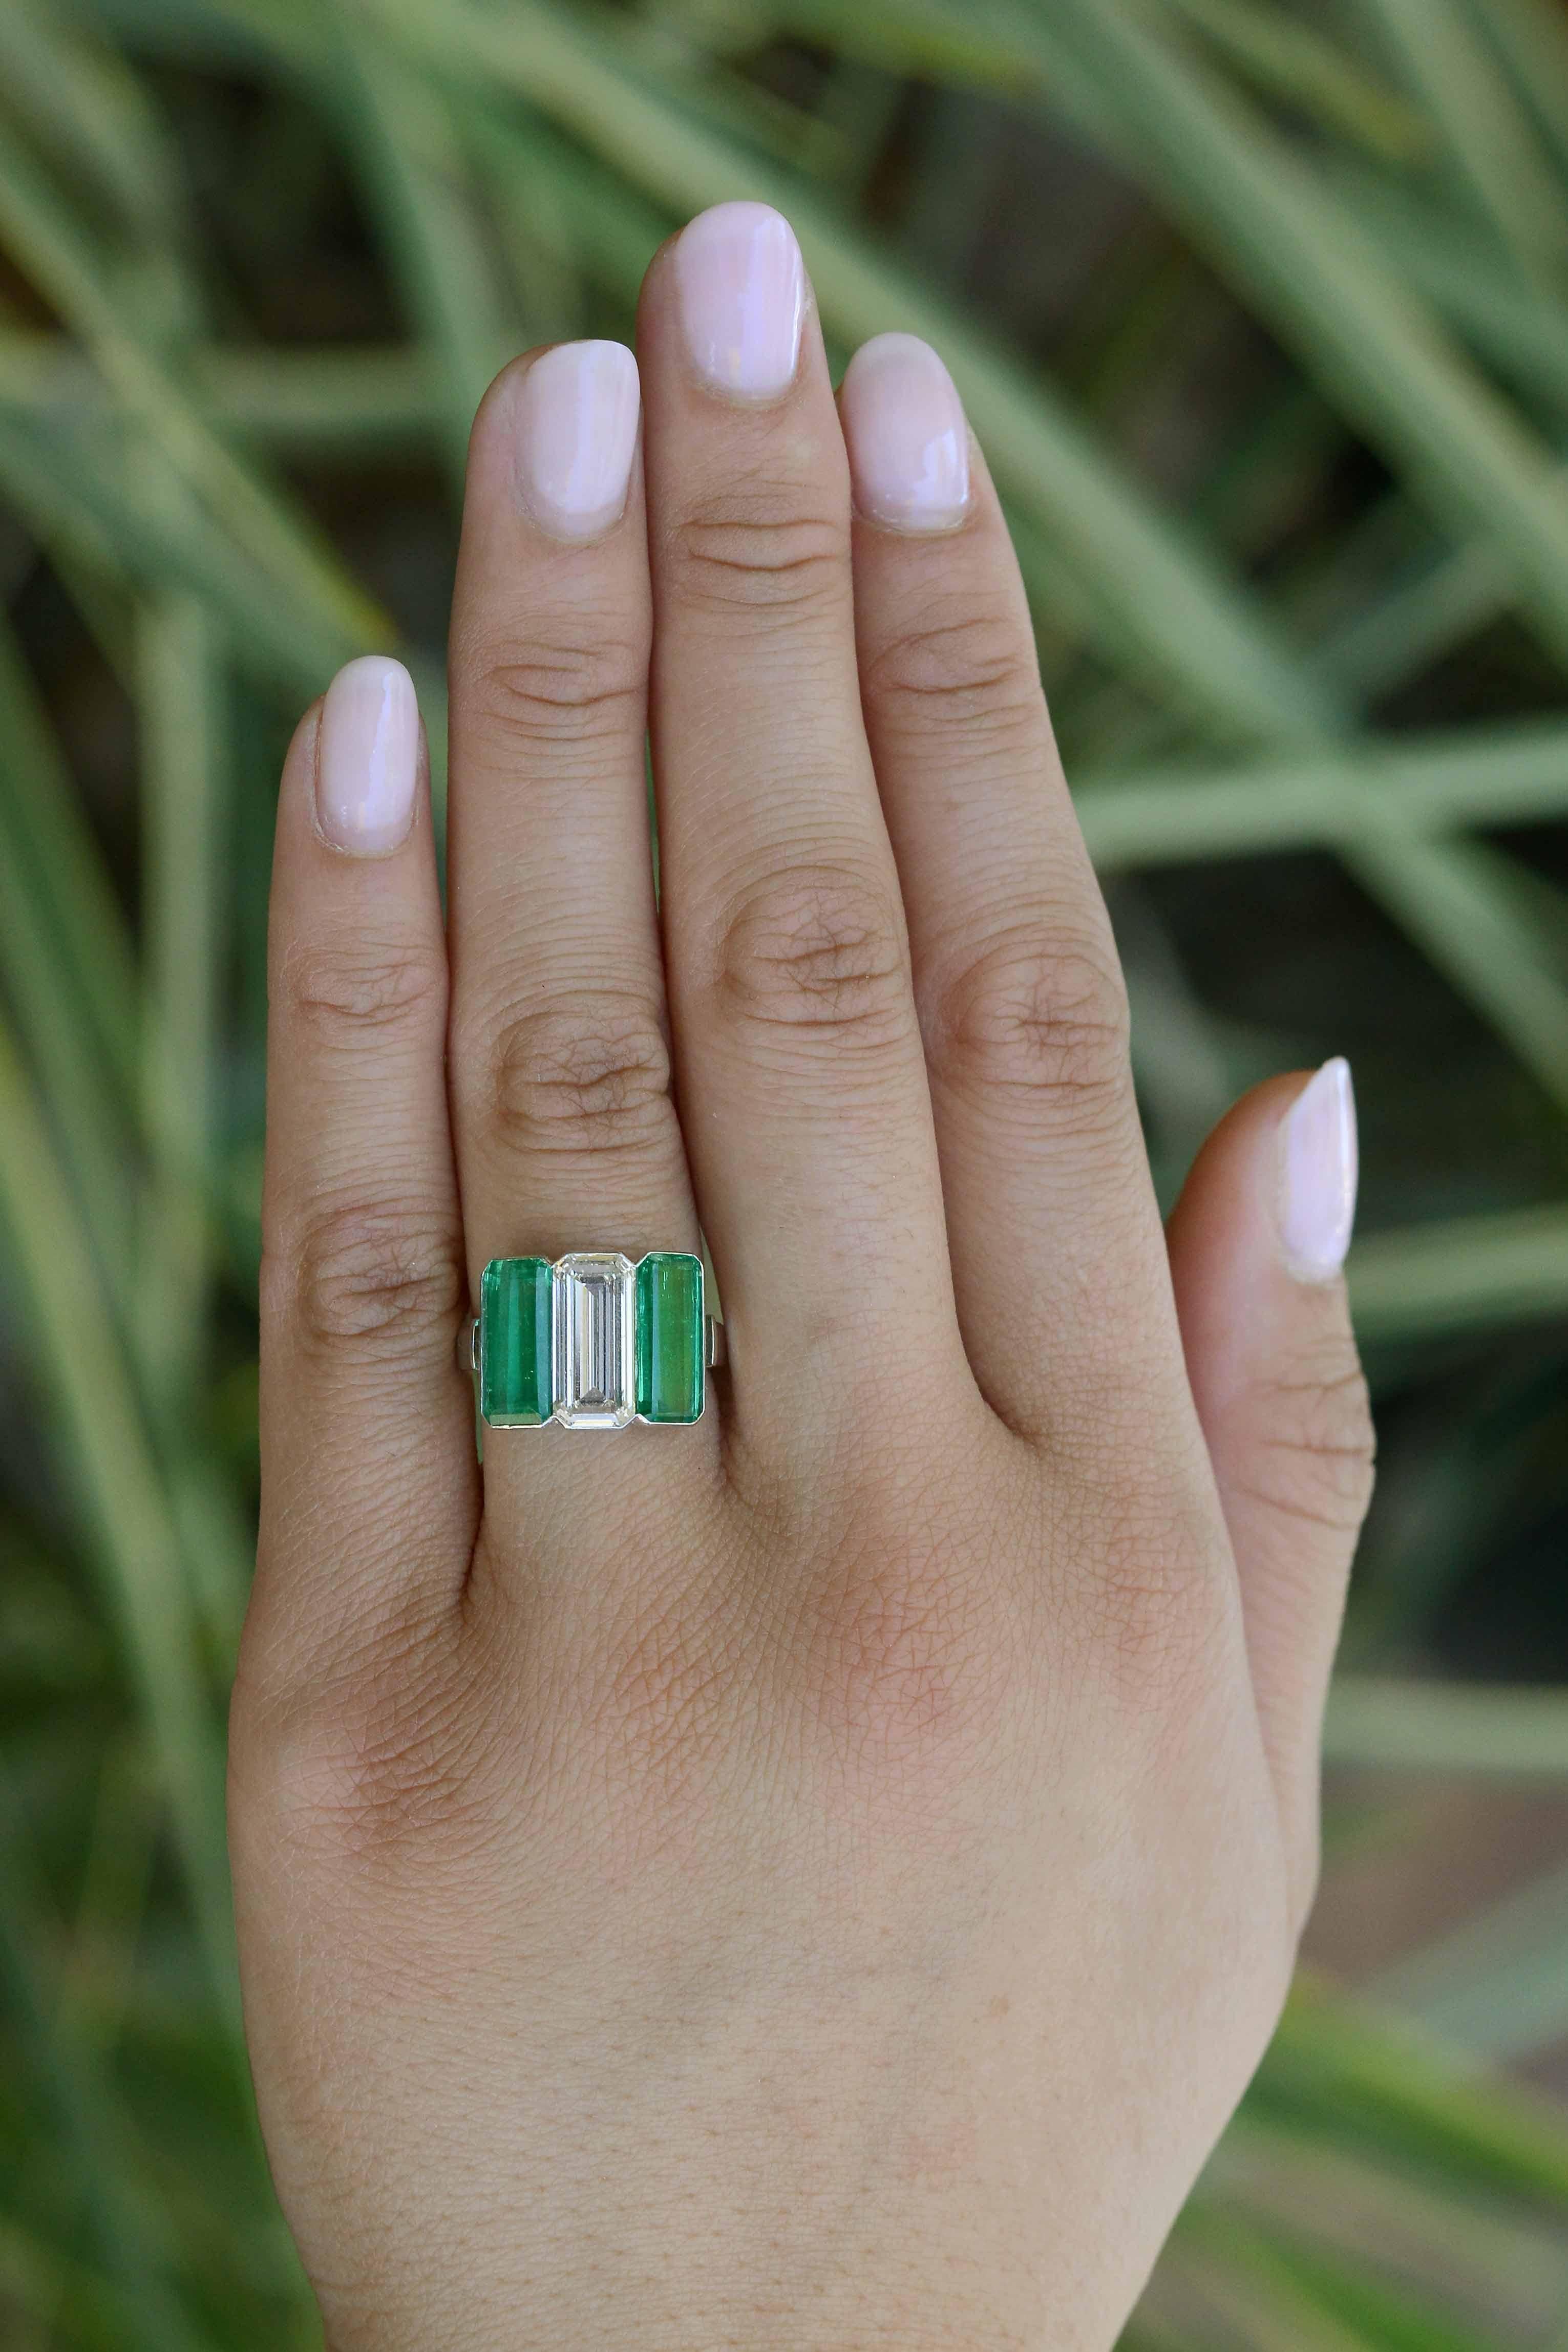 A premiere three stone diamond and emerald engagement ring, hand fabricated in a sleek Art Deco style. At it's center, an exquisite 3 carat emerald cut diamond is shouldered by two vivid green Colombian emeralds, creating prosperous symmetry and